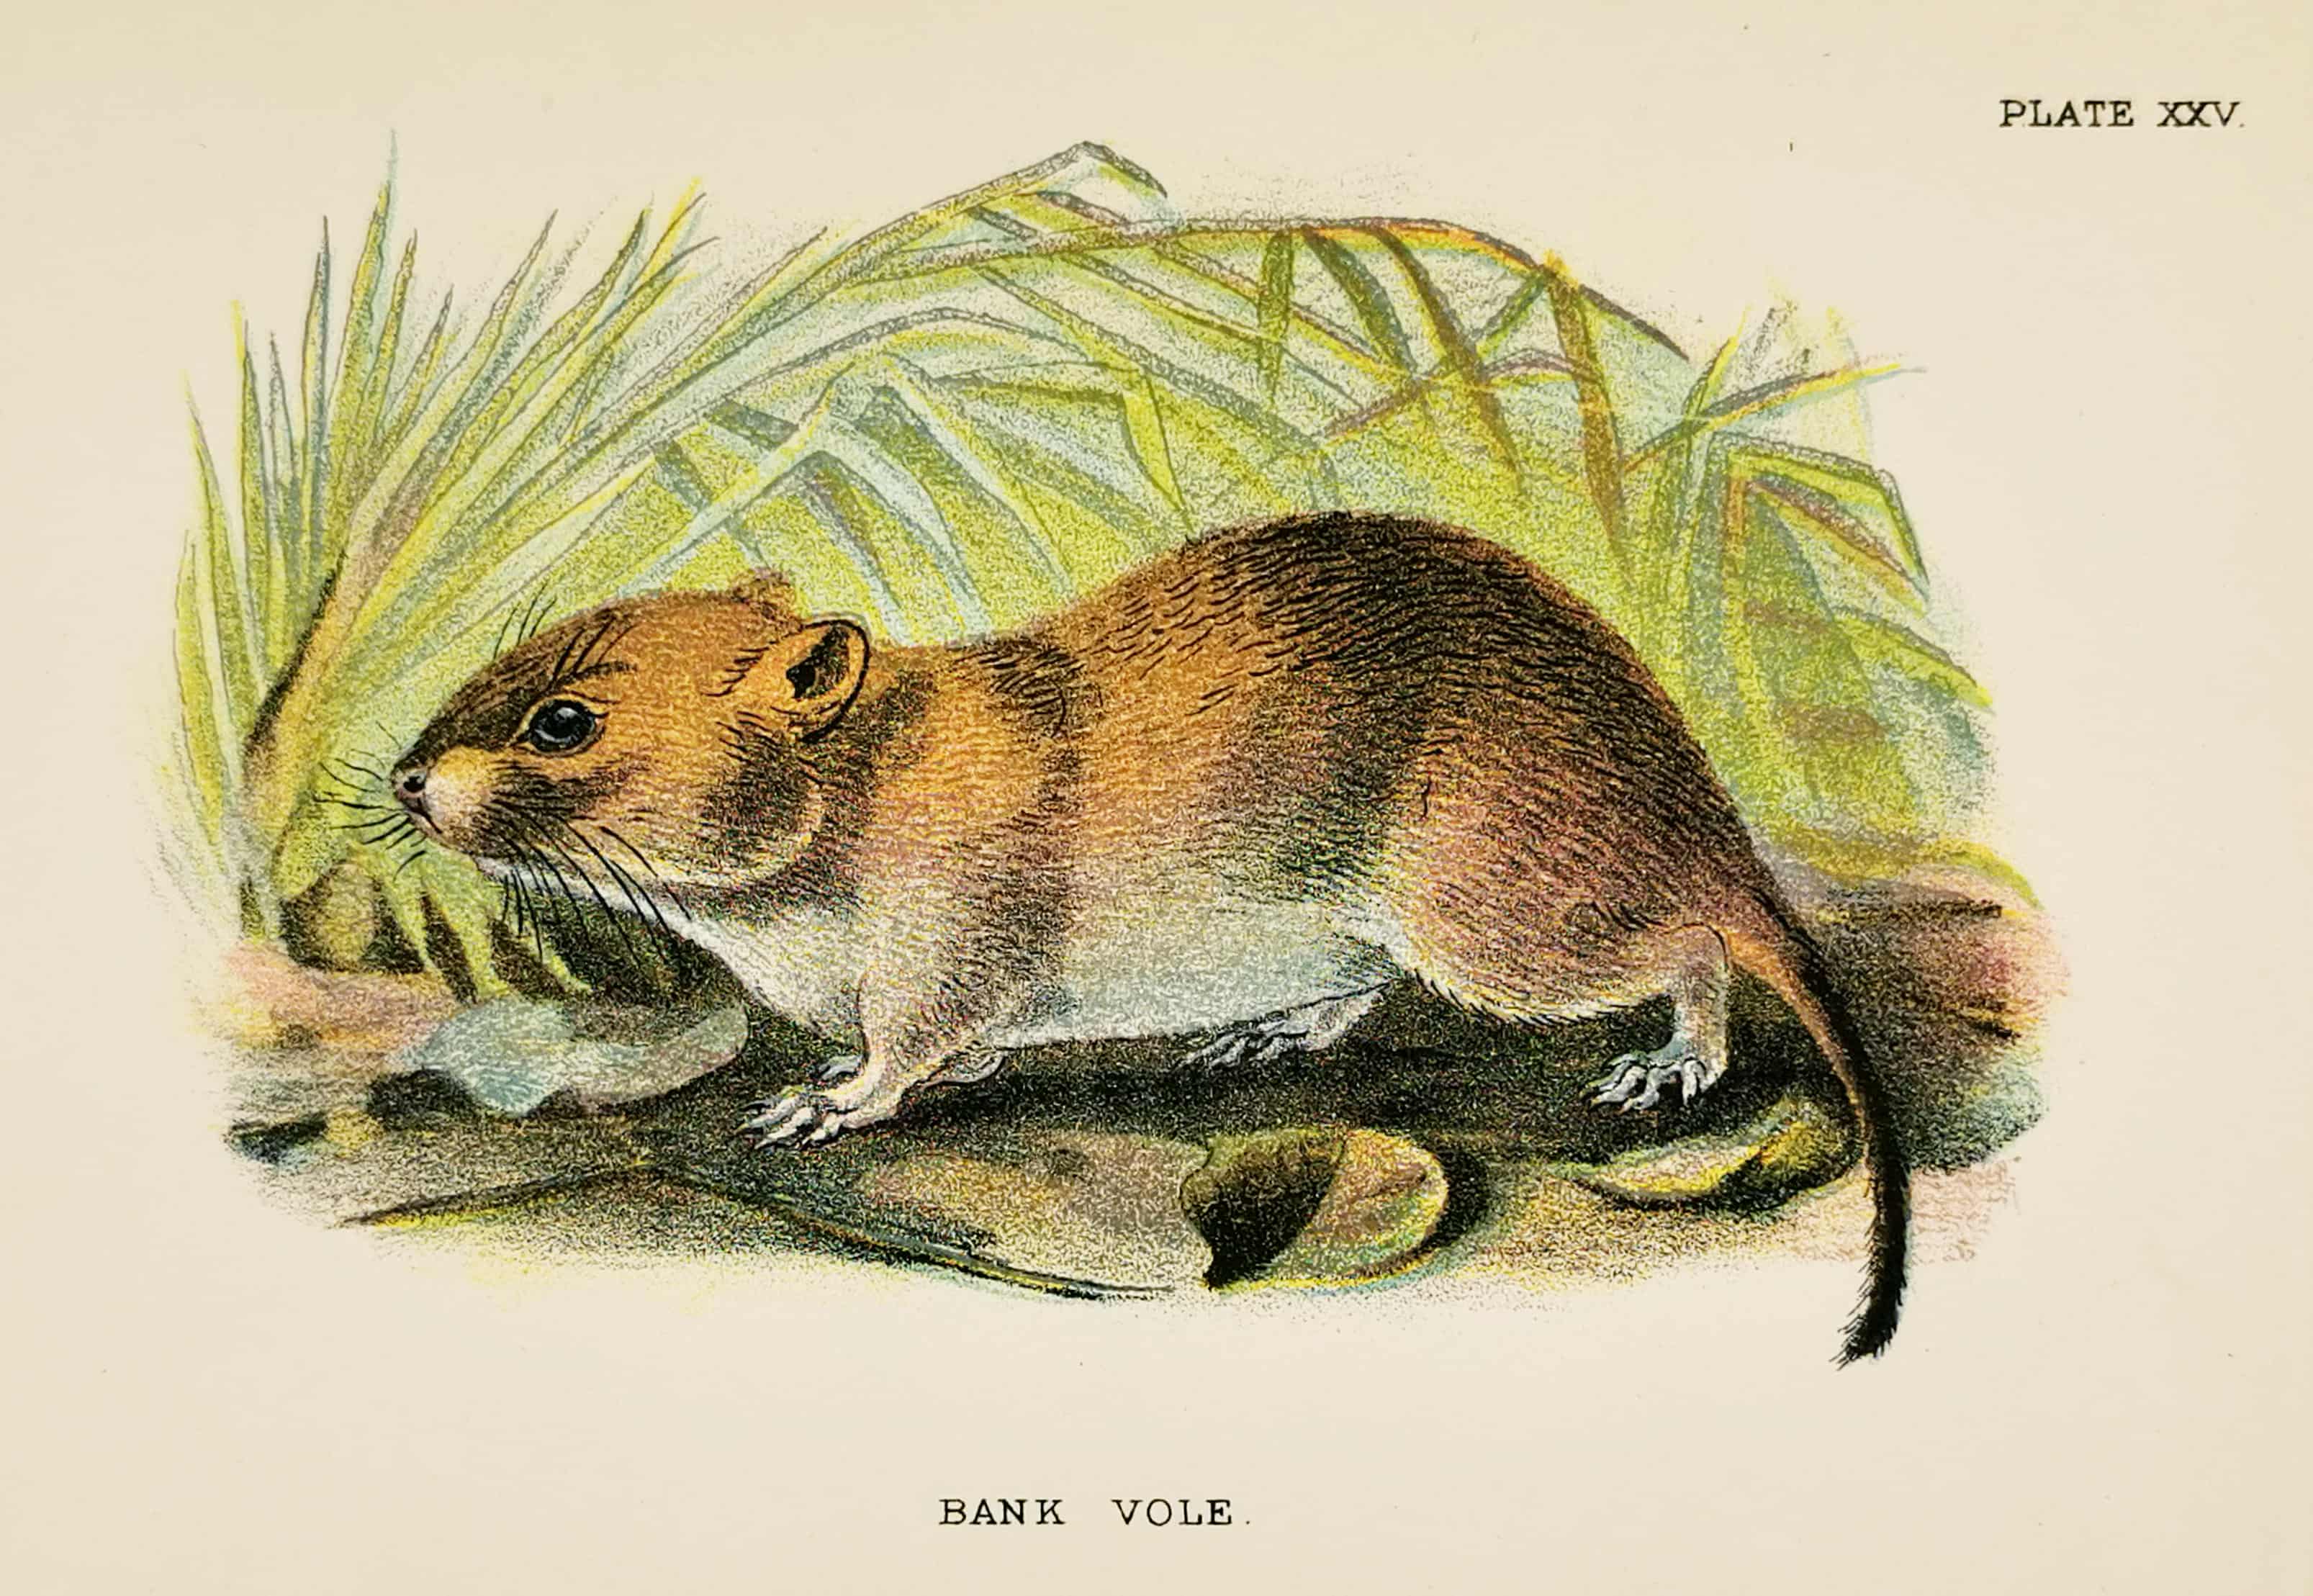 Bank vole. - Antique Print from 1896